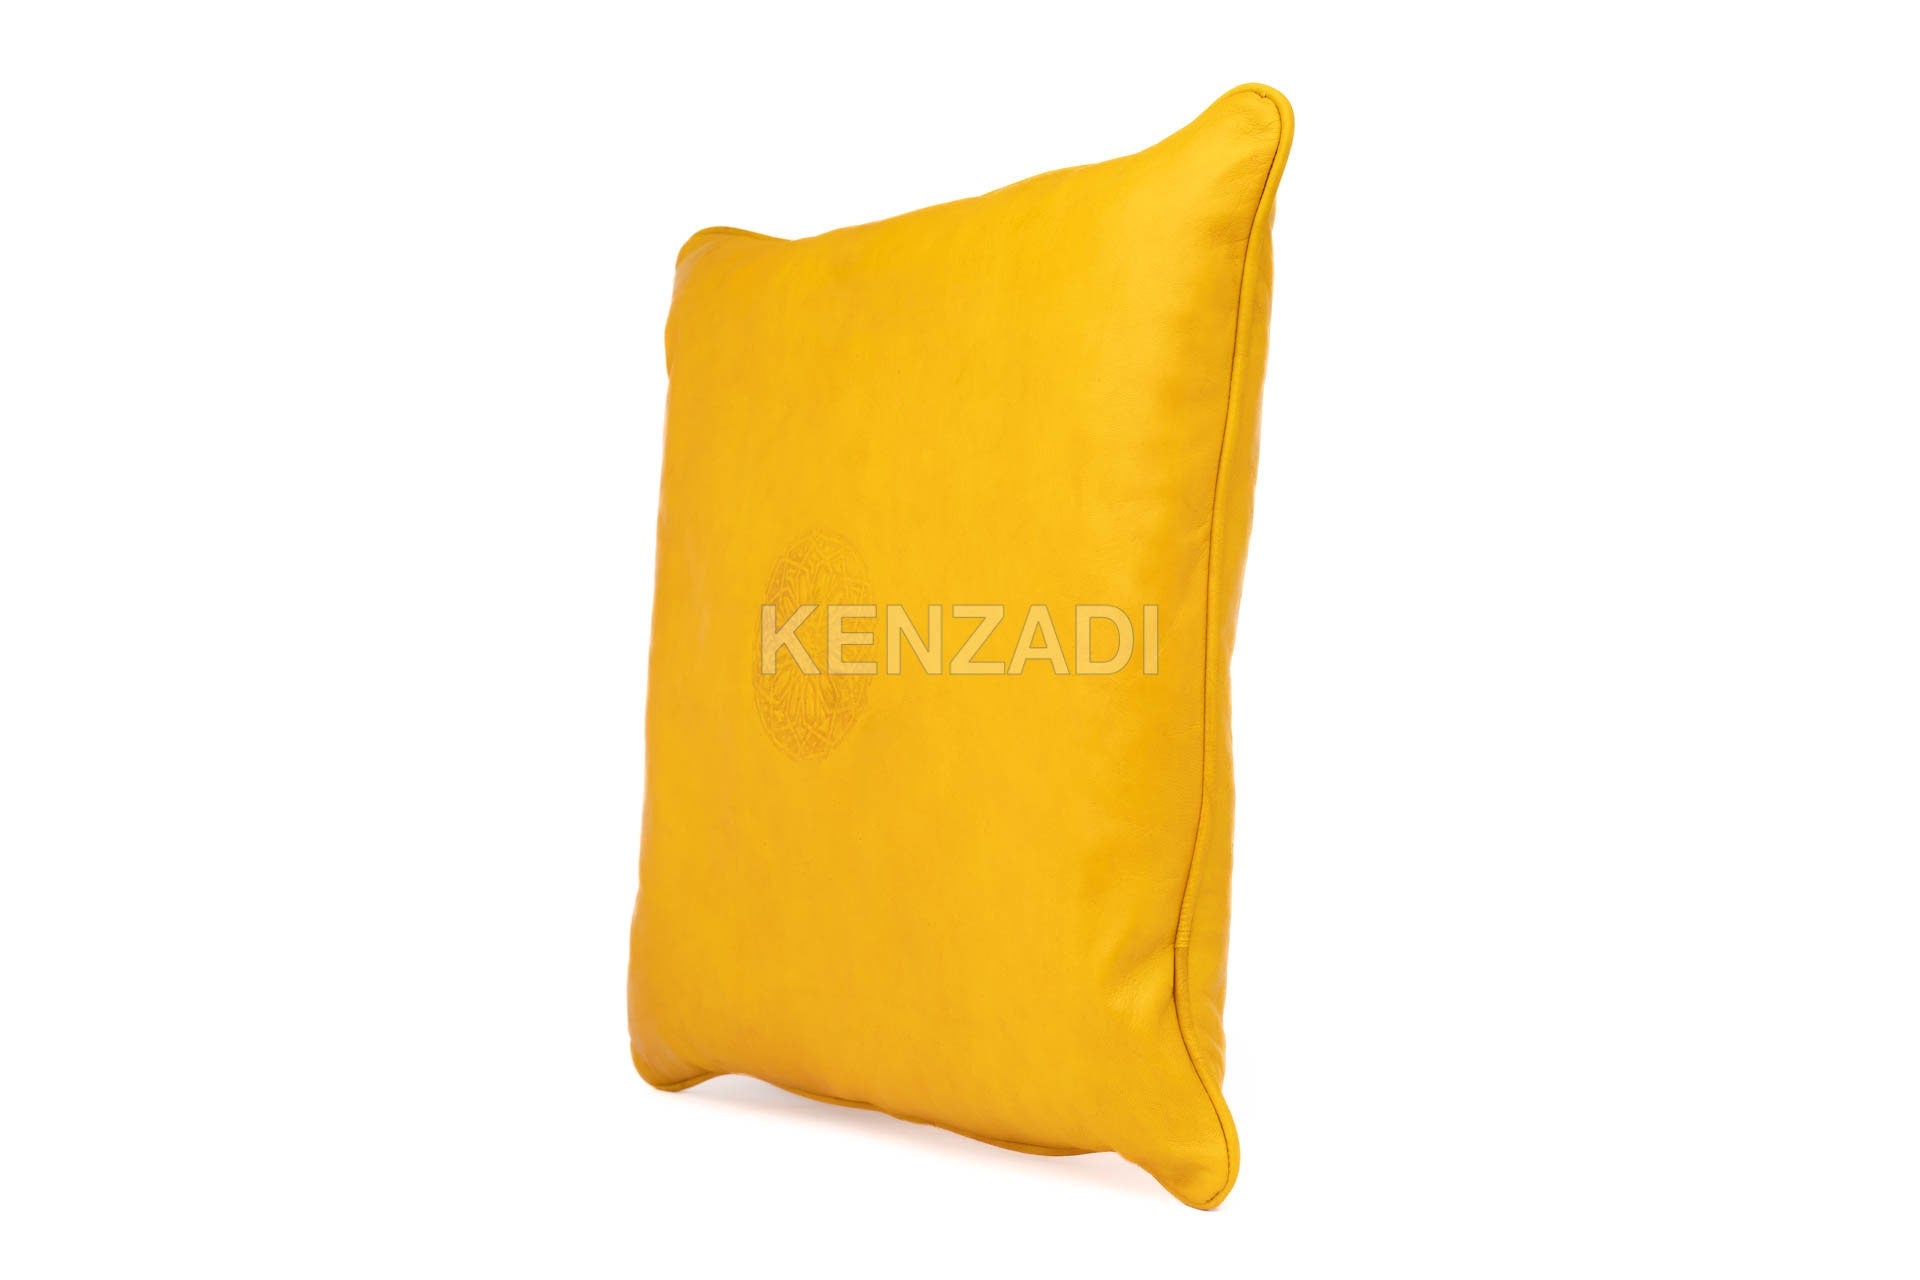 Handmade yellow leather pillowcase with Moroccan craftsmanship - stylish and versatile decor piece for indoor and outdoor use